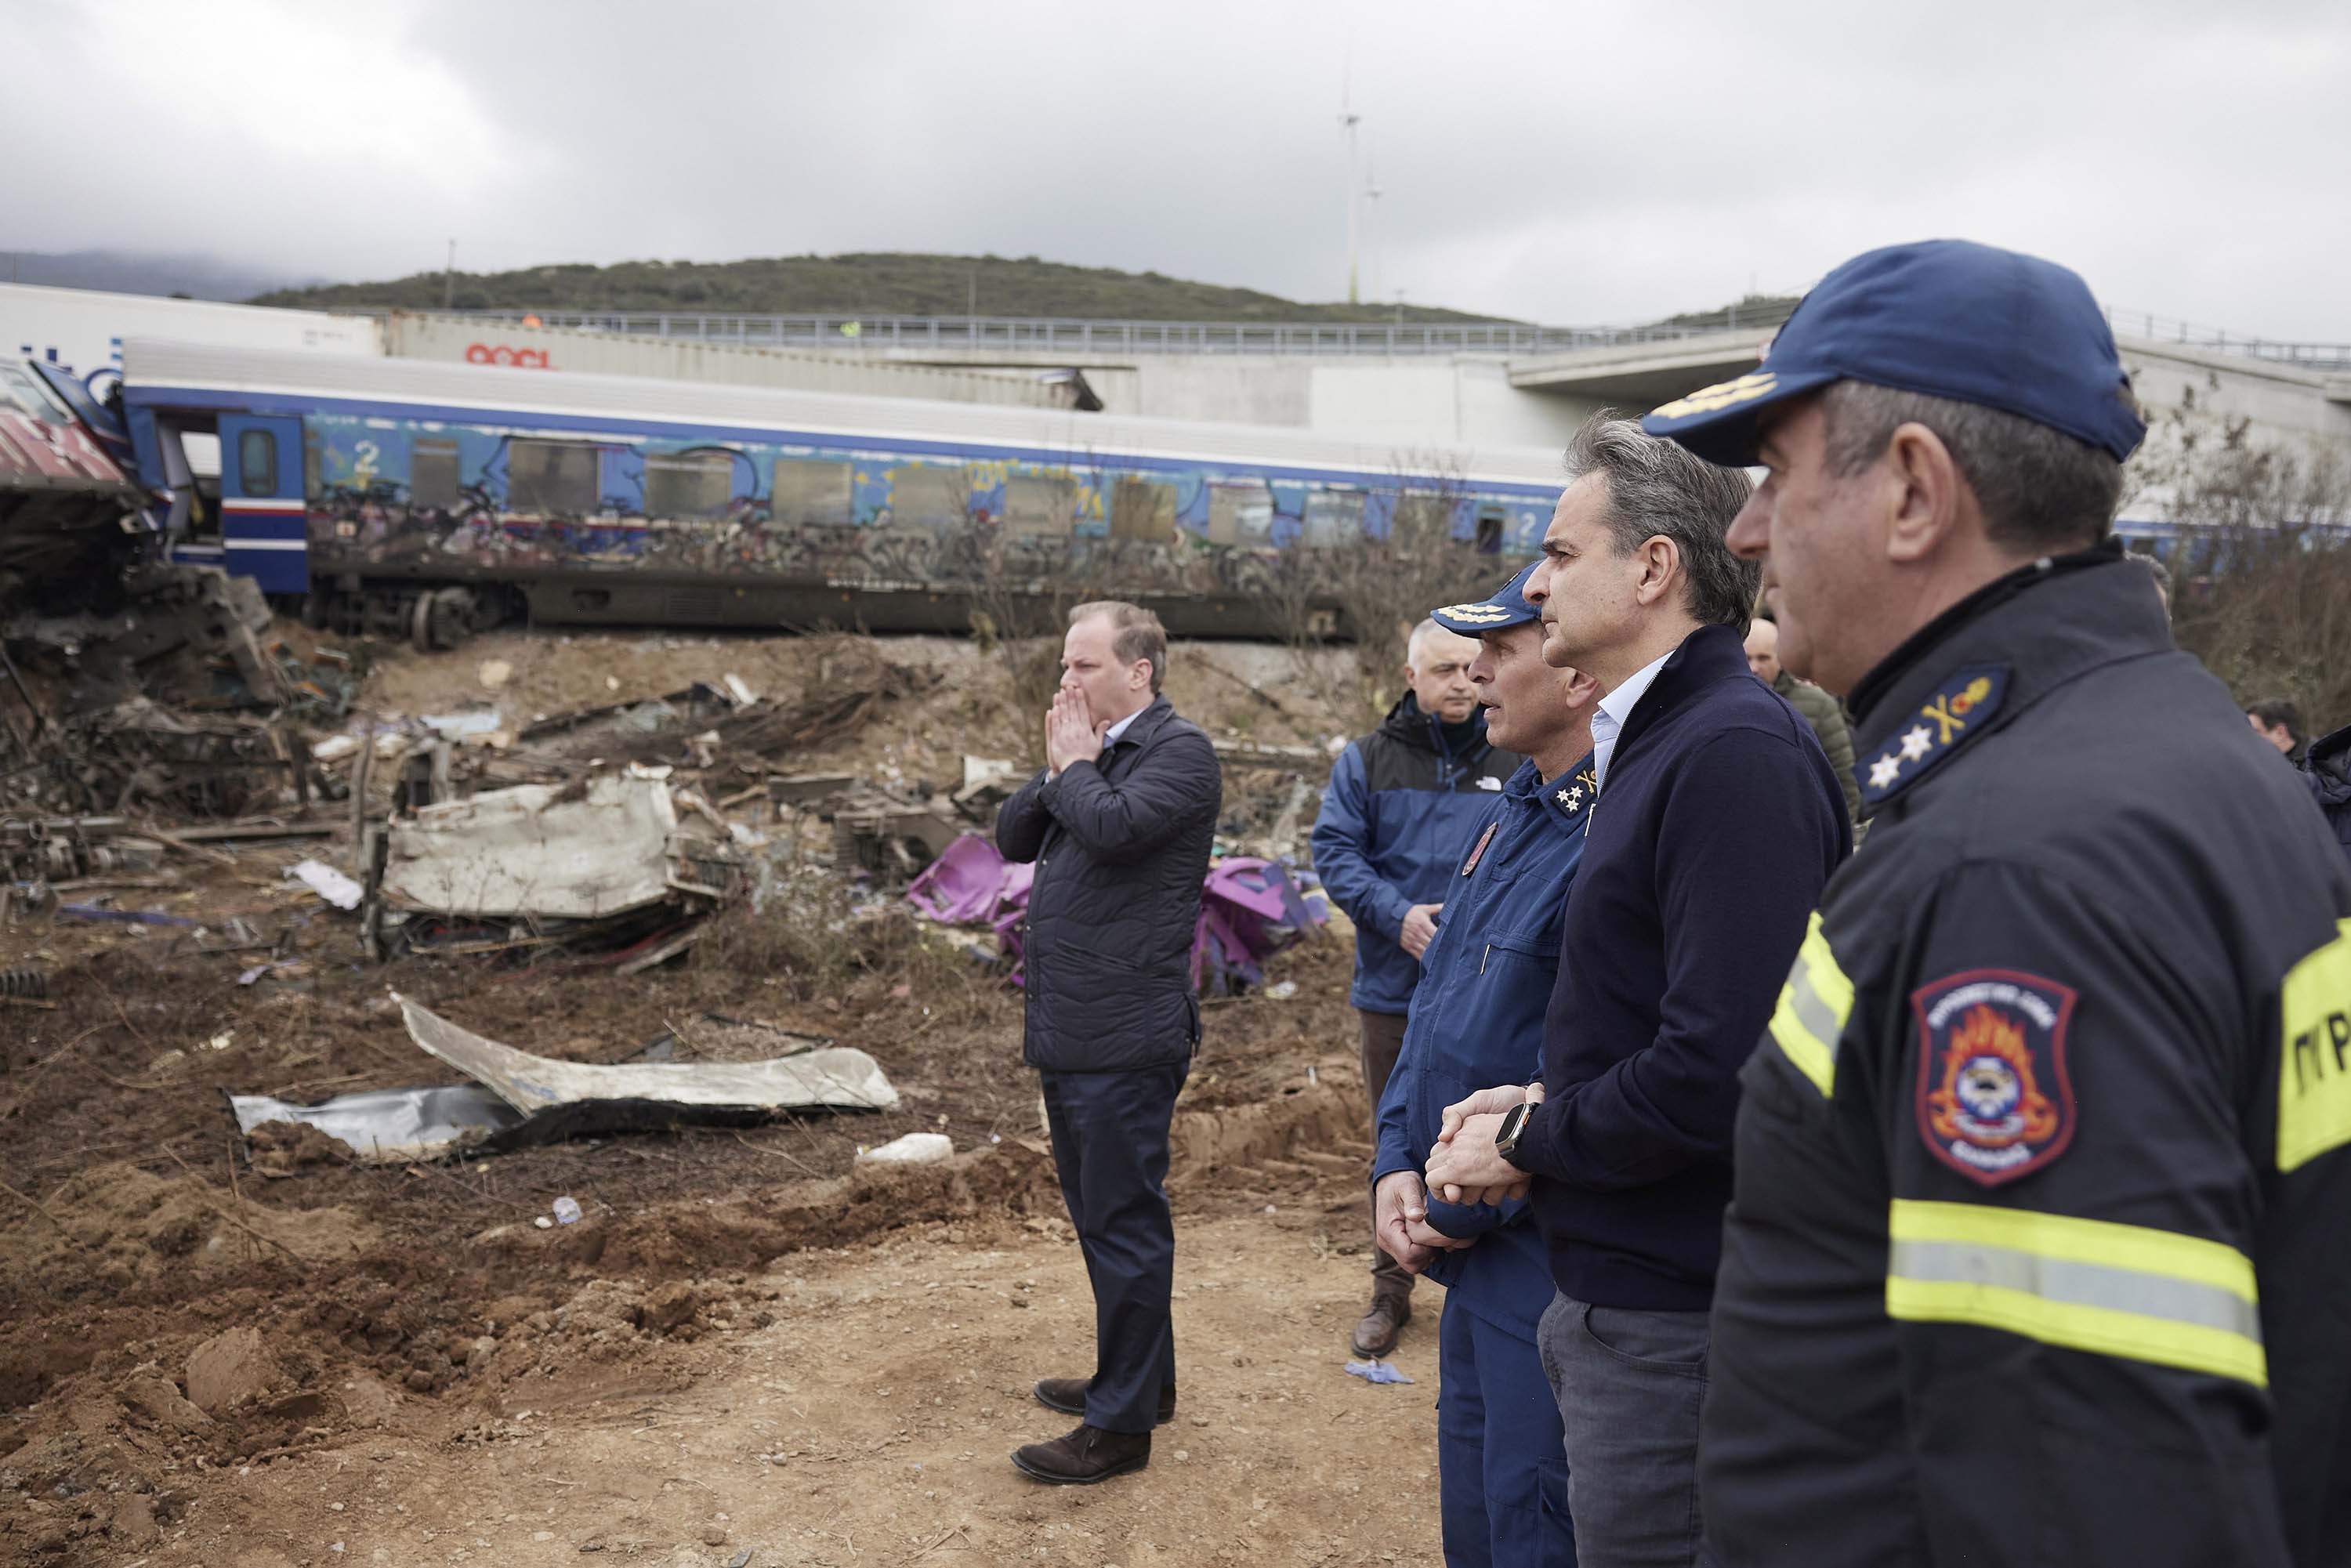 Greek transport minister Kostas Karamanlis, center, views the aftermath of the train collision, along with Greece's Prime Minister, Kyriakos Mitsotakis, second right, in Tempi, Greece, on Wednesday.